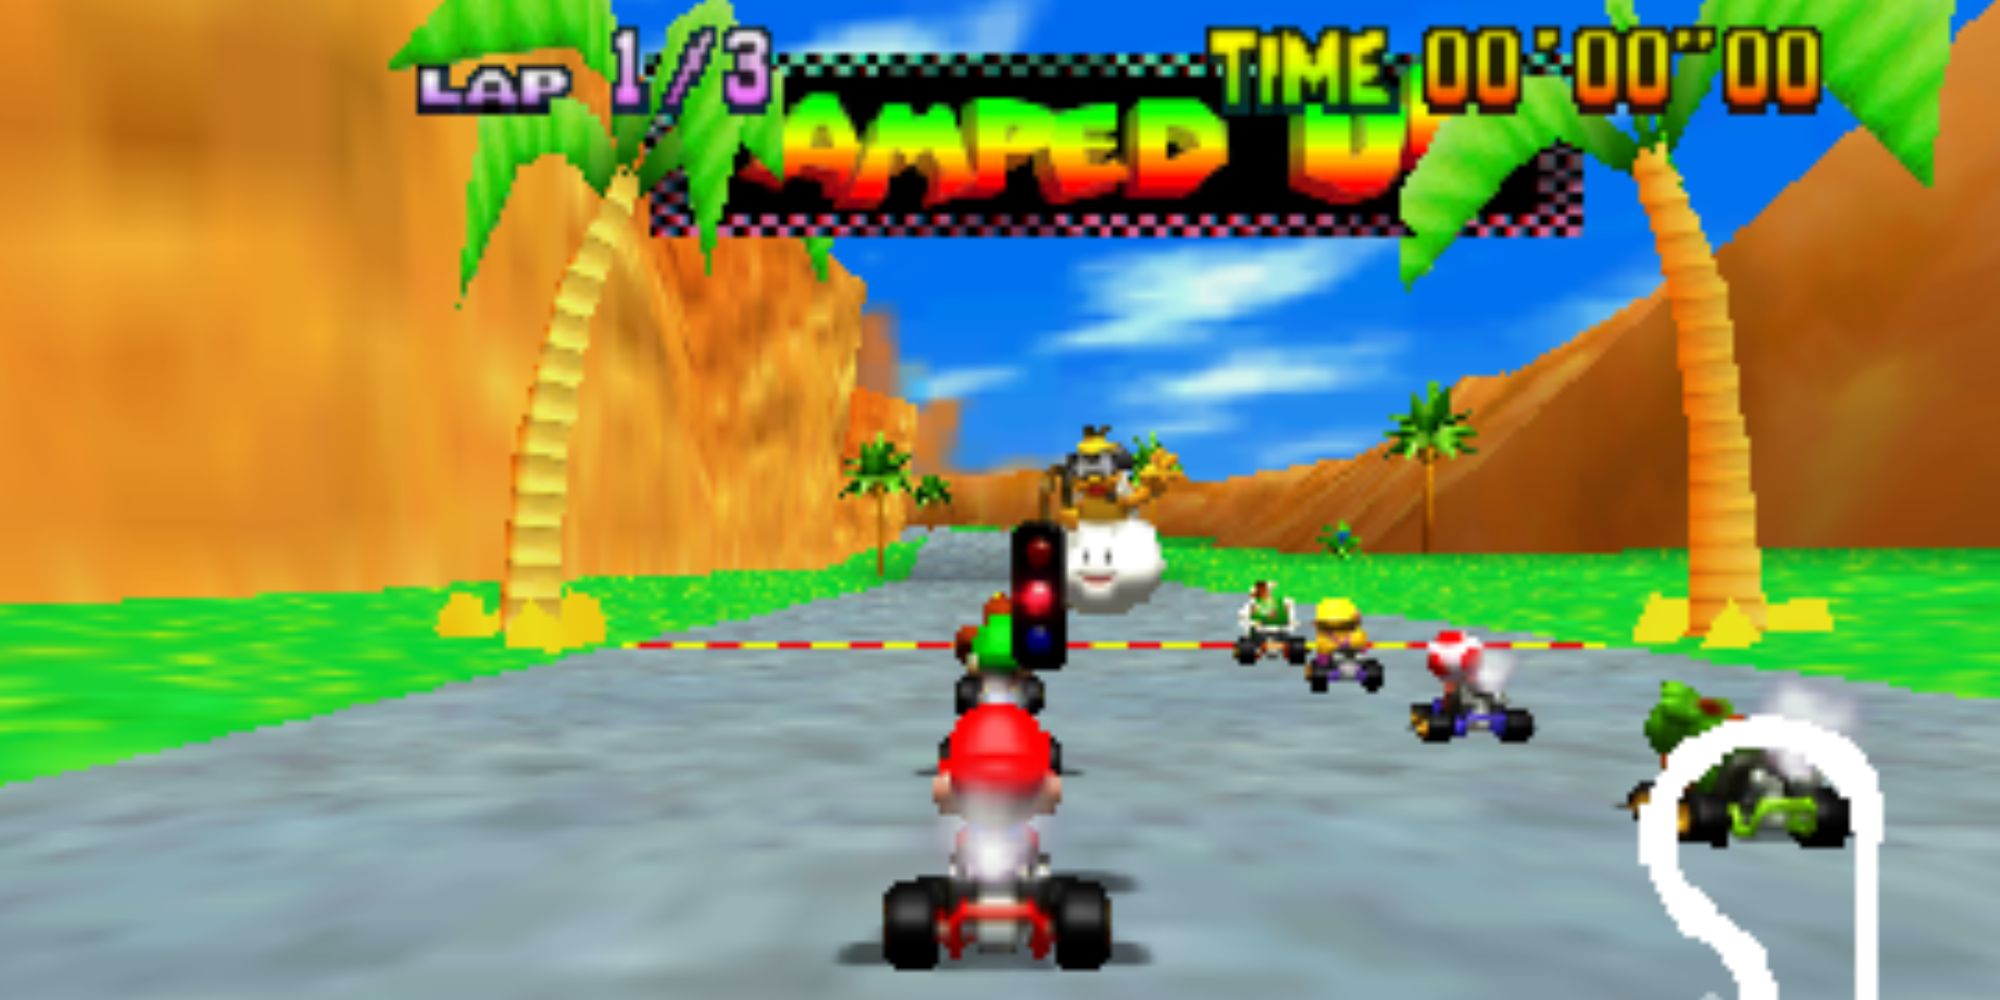 Mario about to race on an Amped Up course